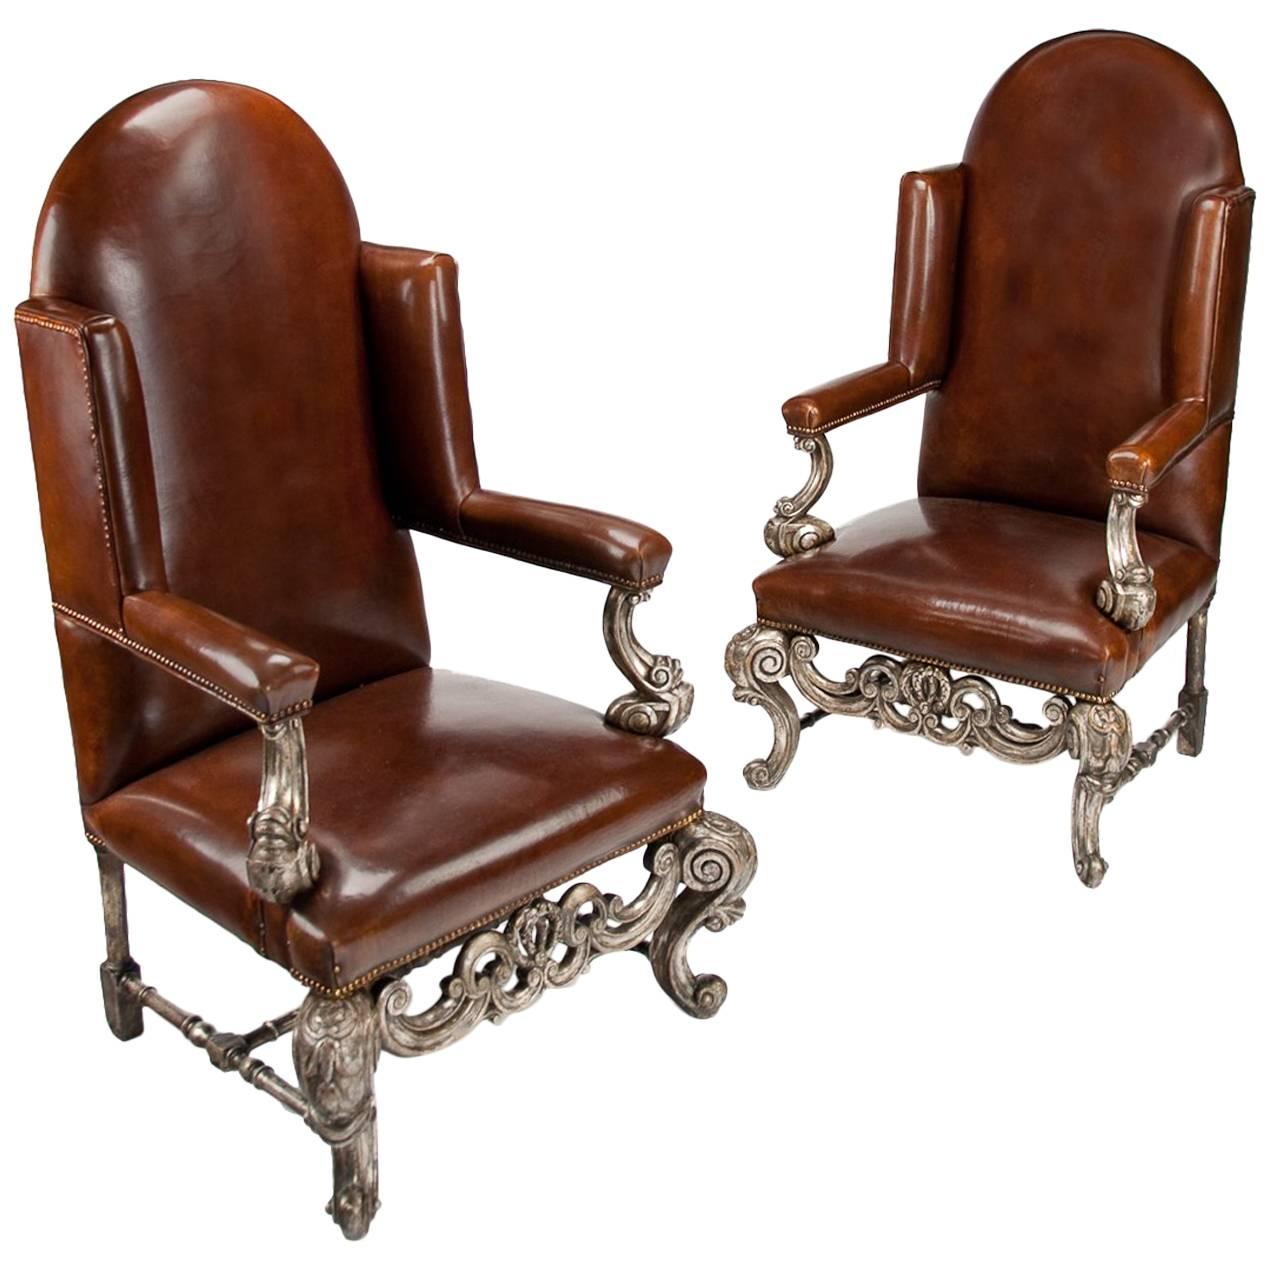 Antique Pair of Silver Gilt Leather Upholstered Wing Chairs